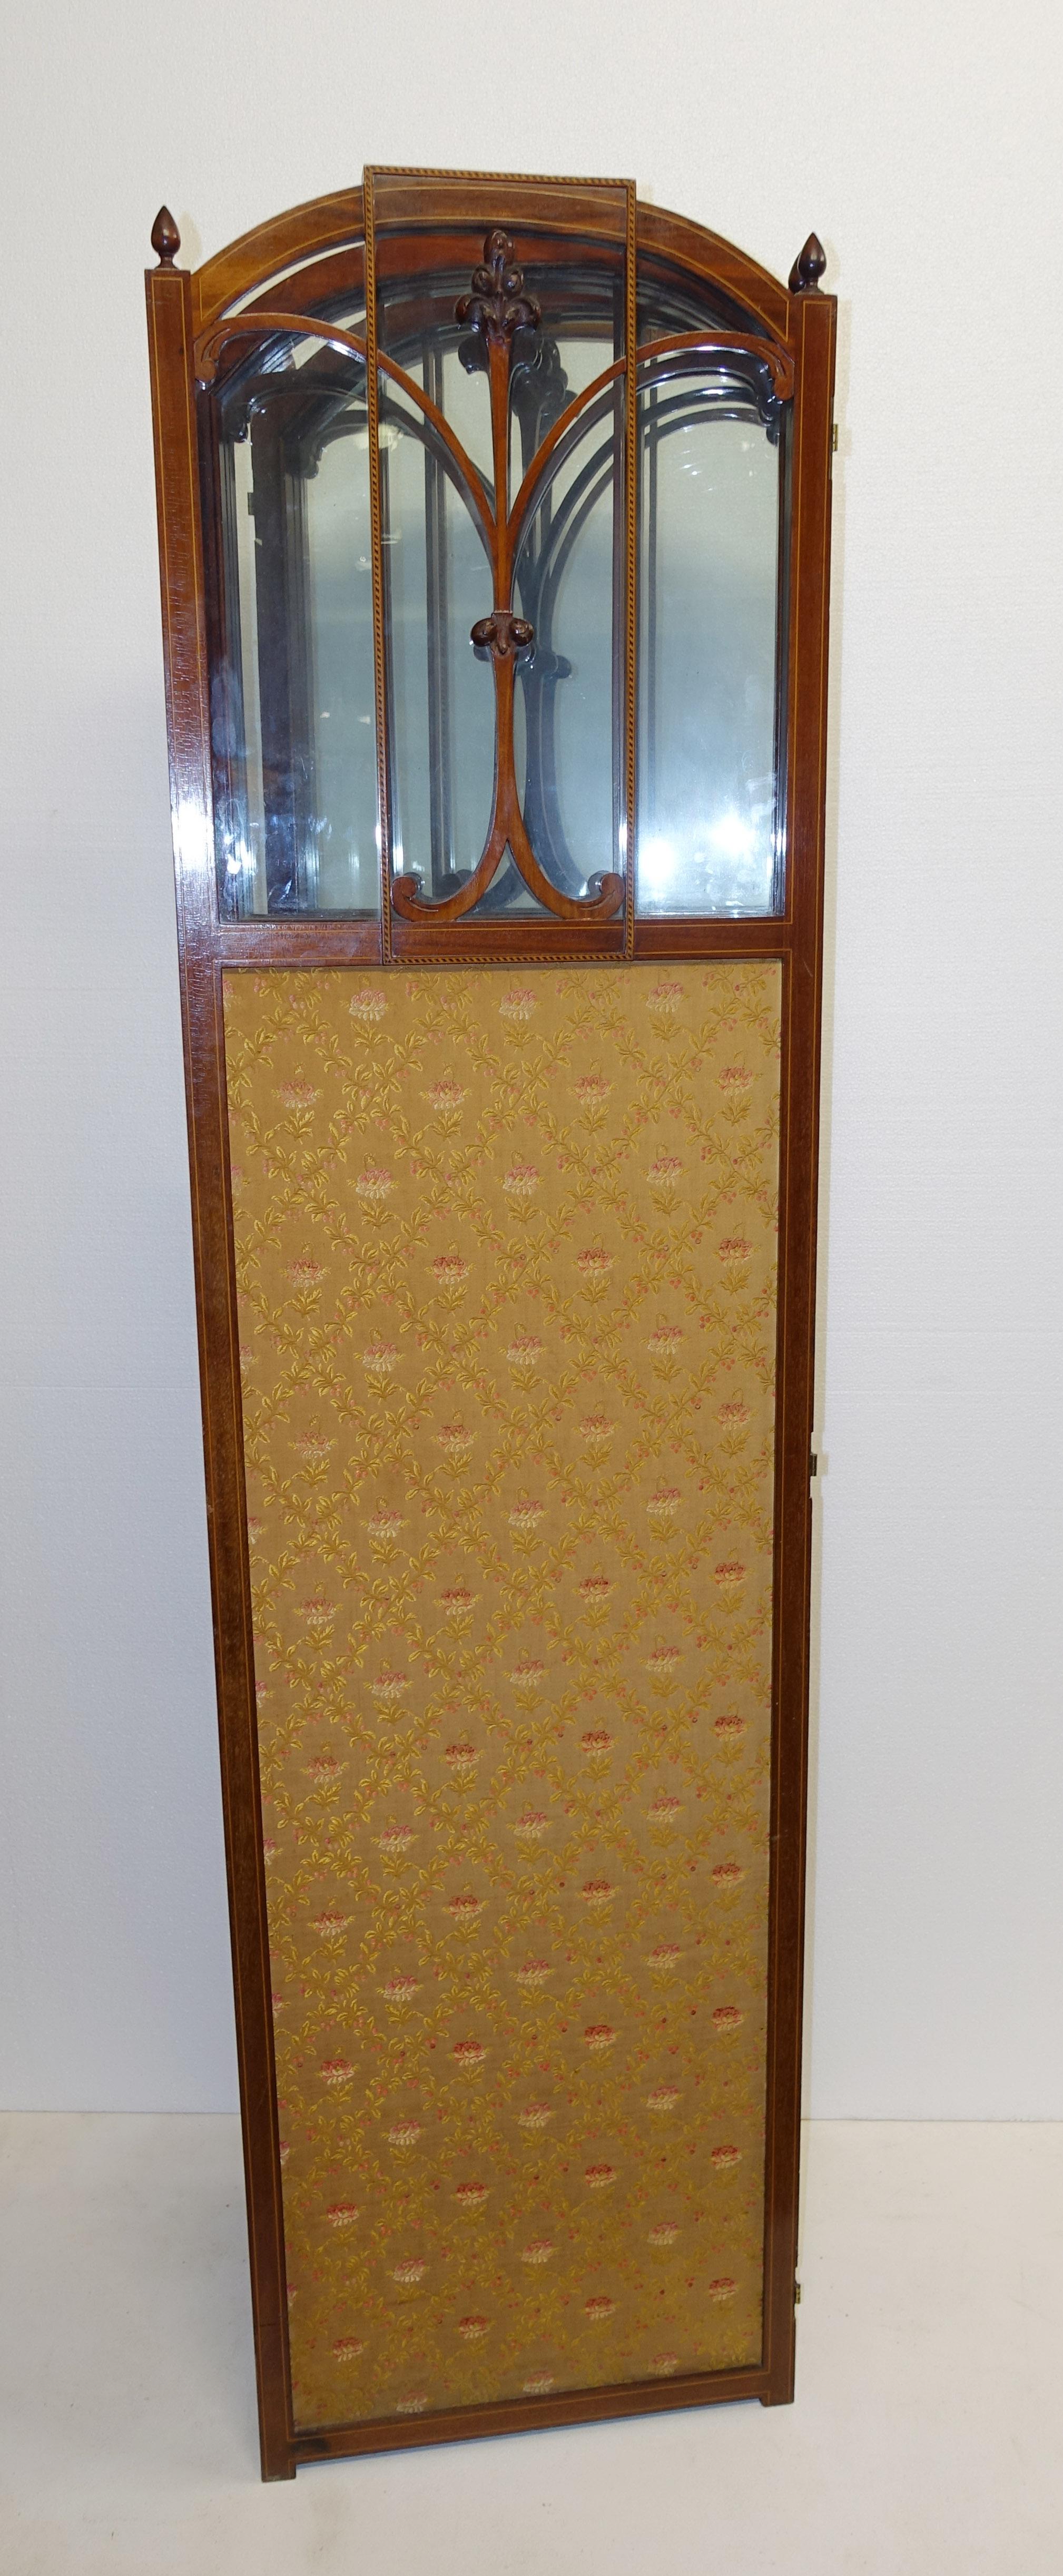 Early 20th Century Edwardian Screen Room Divider Satinwood Fabric 1910 For Sale